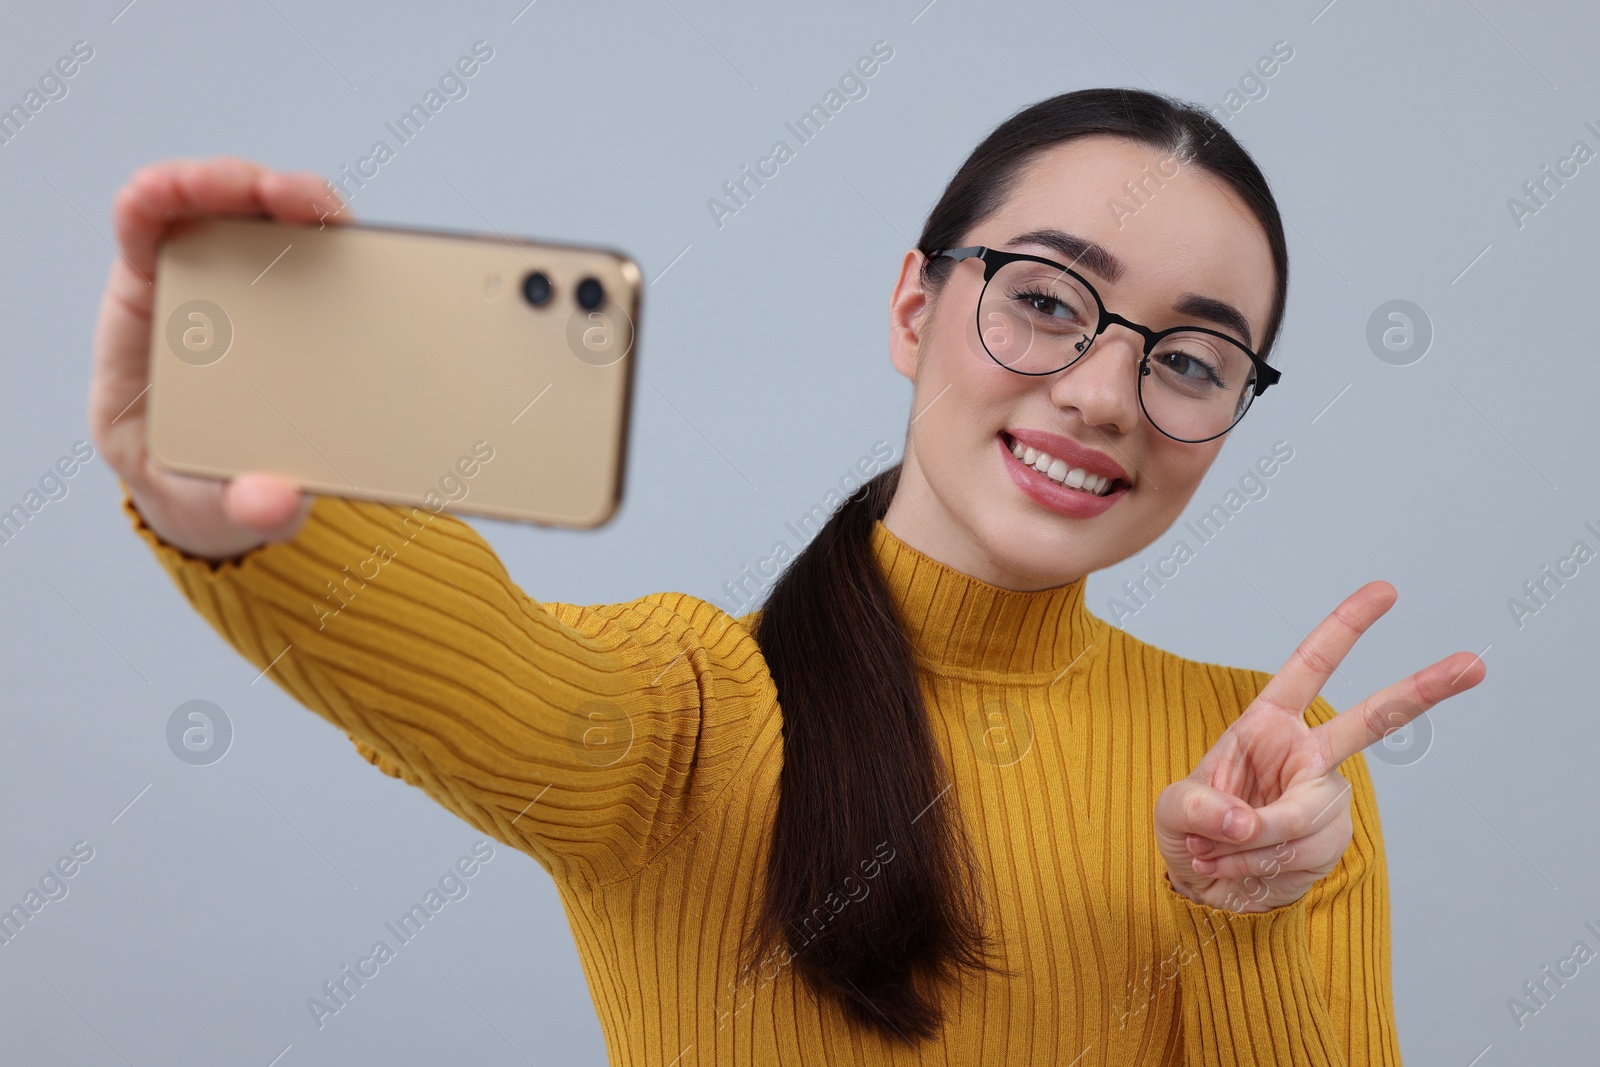 Photo of Smiling young woman taking selfie with smartphone and showing peace sign on grey background